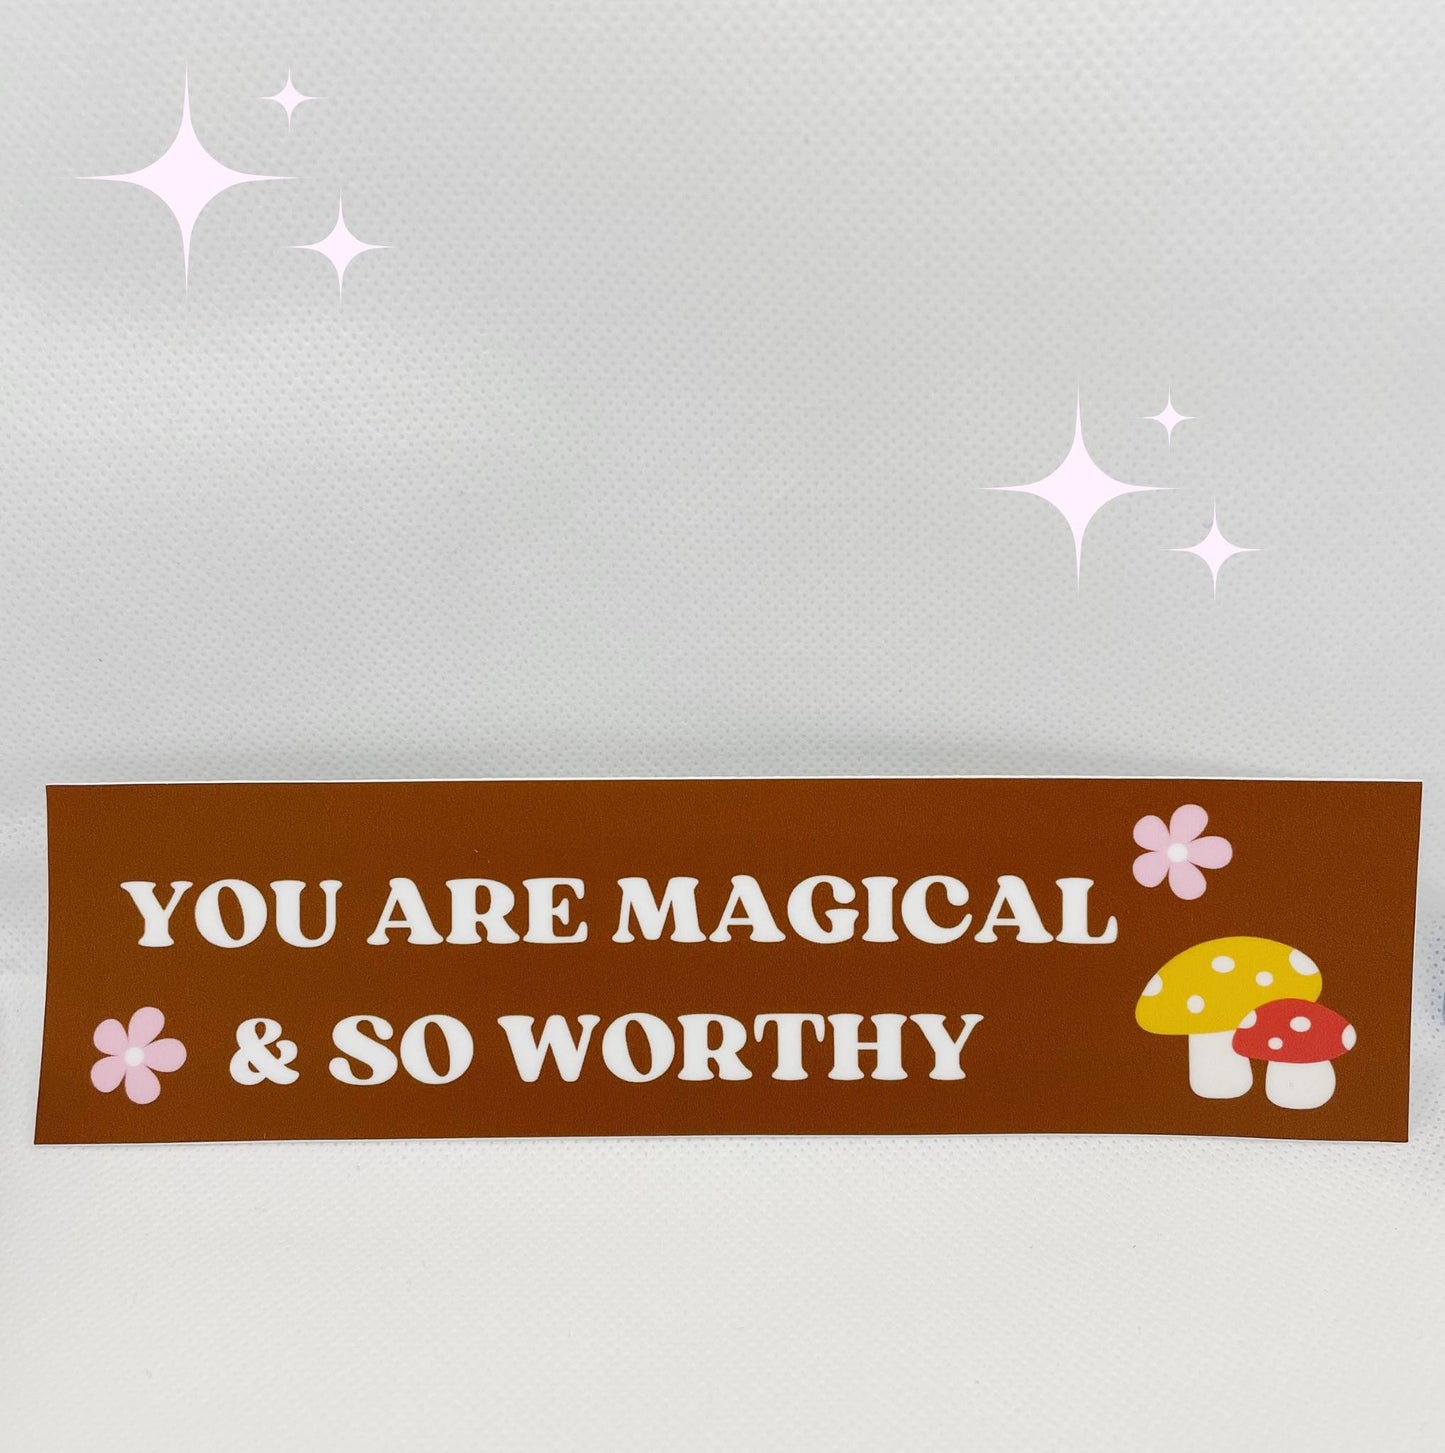 You are magical & so worthy bumper sticker